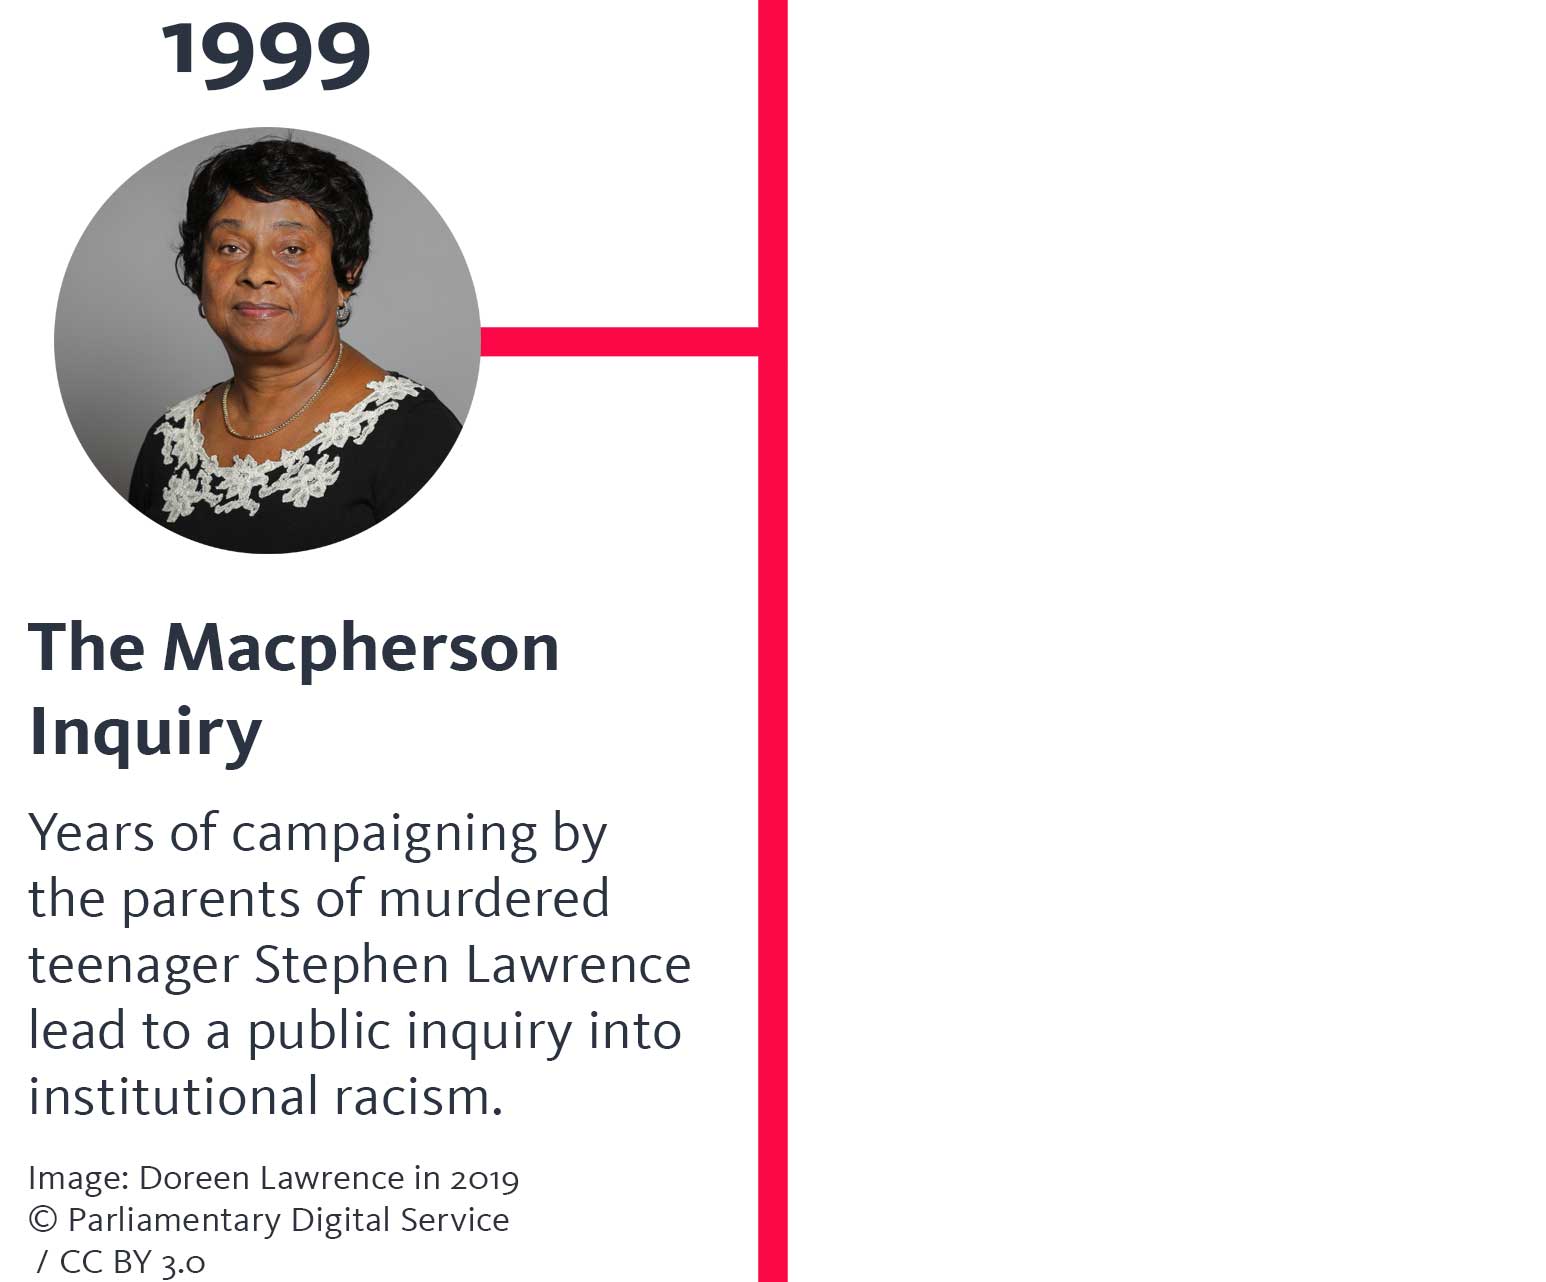 The year '1999' appears above a photograph of Doreen Lawrence. A heading below says 'The Macpherson Inquiry', and text below that says 'Years of campaigning by the parents of murdered teenager Stephen Lawrence lead to a public inquiry into institutional racism.' and below that, 'Image: Doreen Lawrence in 2019 © Parliamentary Digital Service / CC BY 3.0'.